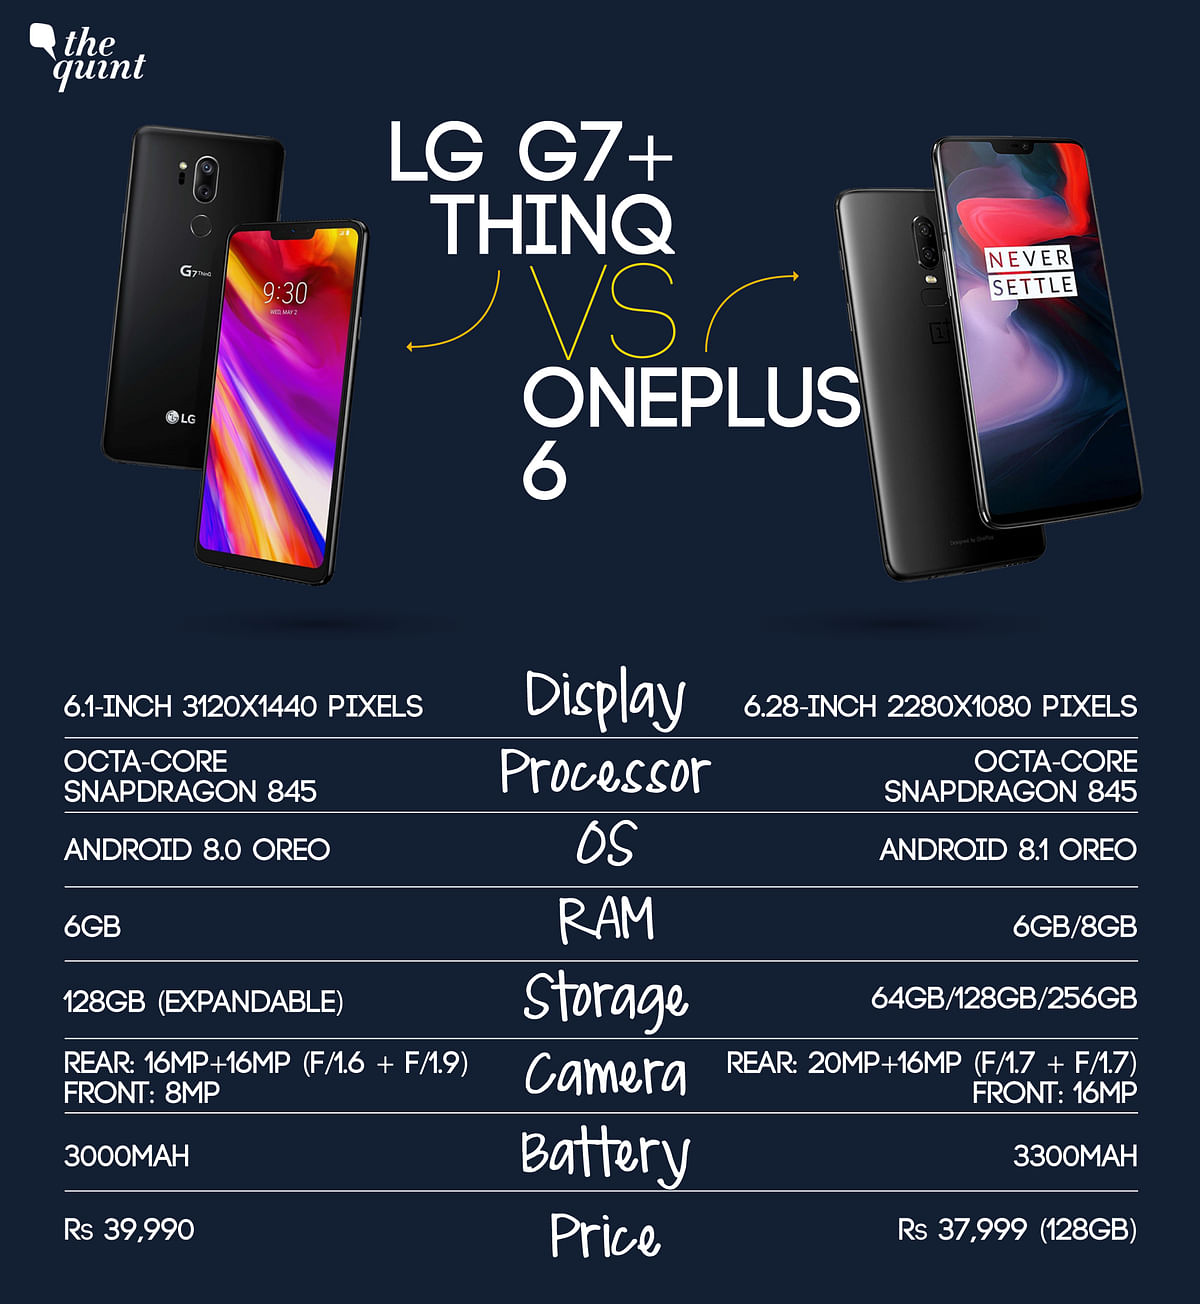 LG G7+ ThinQ for Rs 39,990 goes up against the powerful OnePlus 6. Which one of these should you buy?